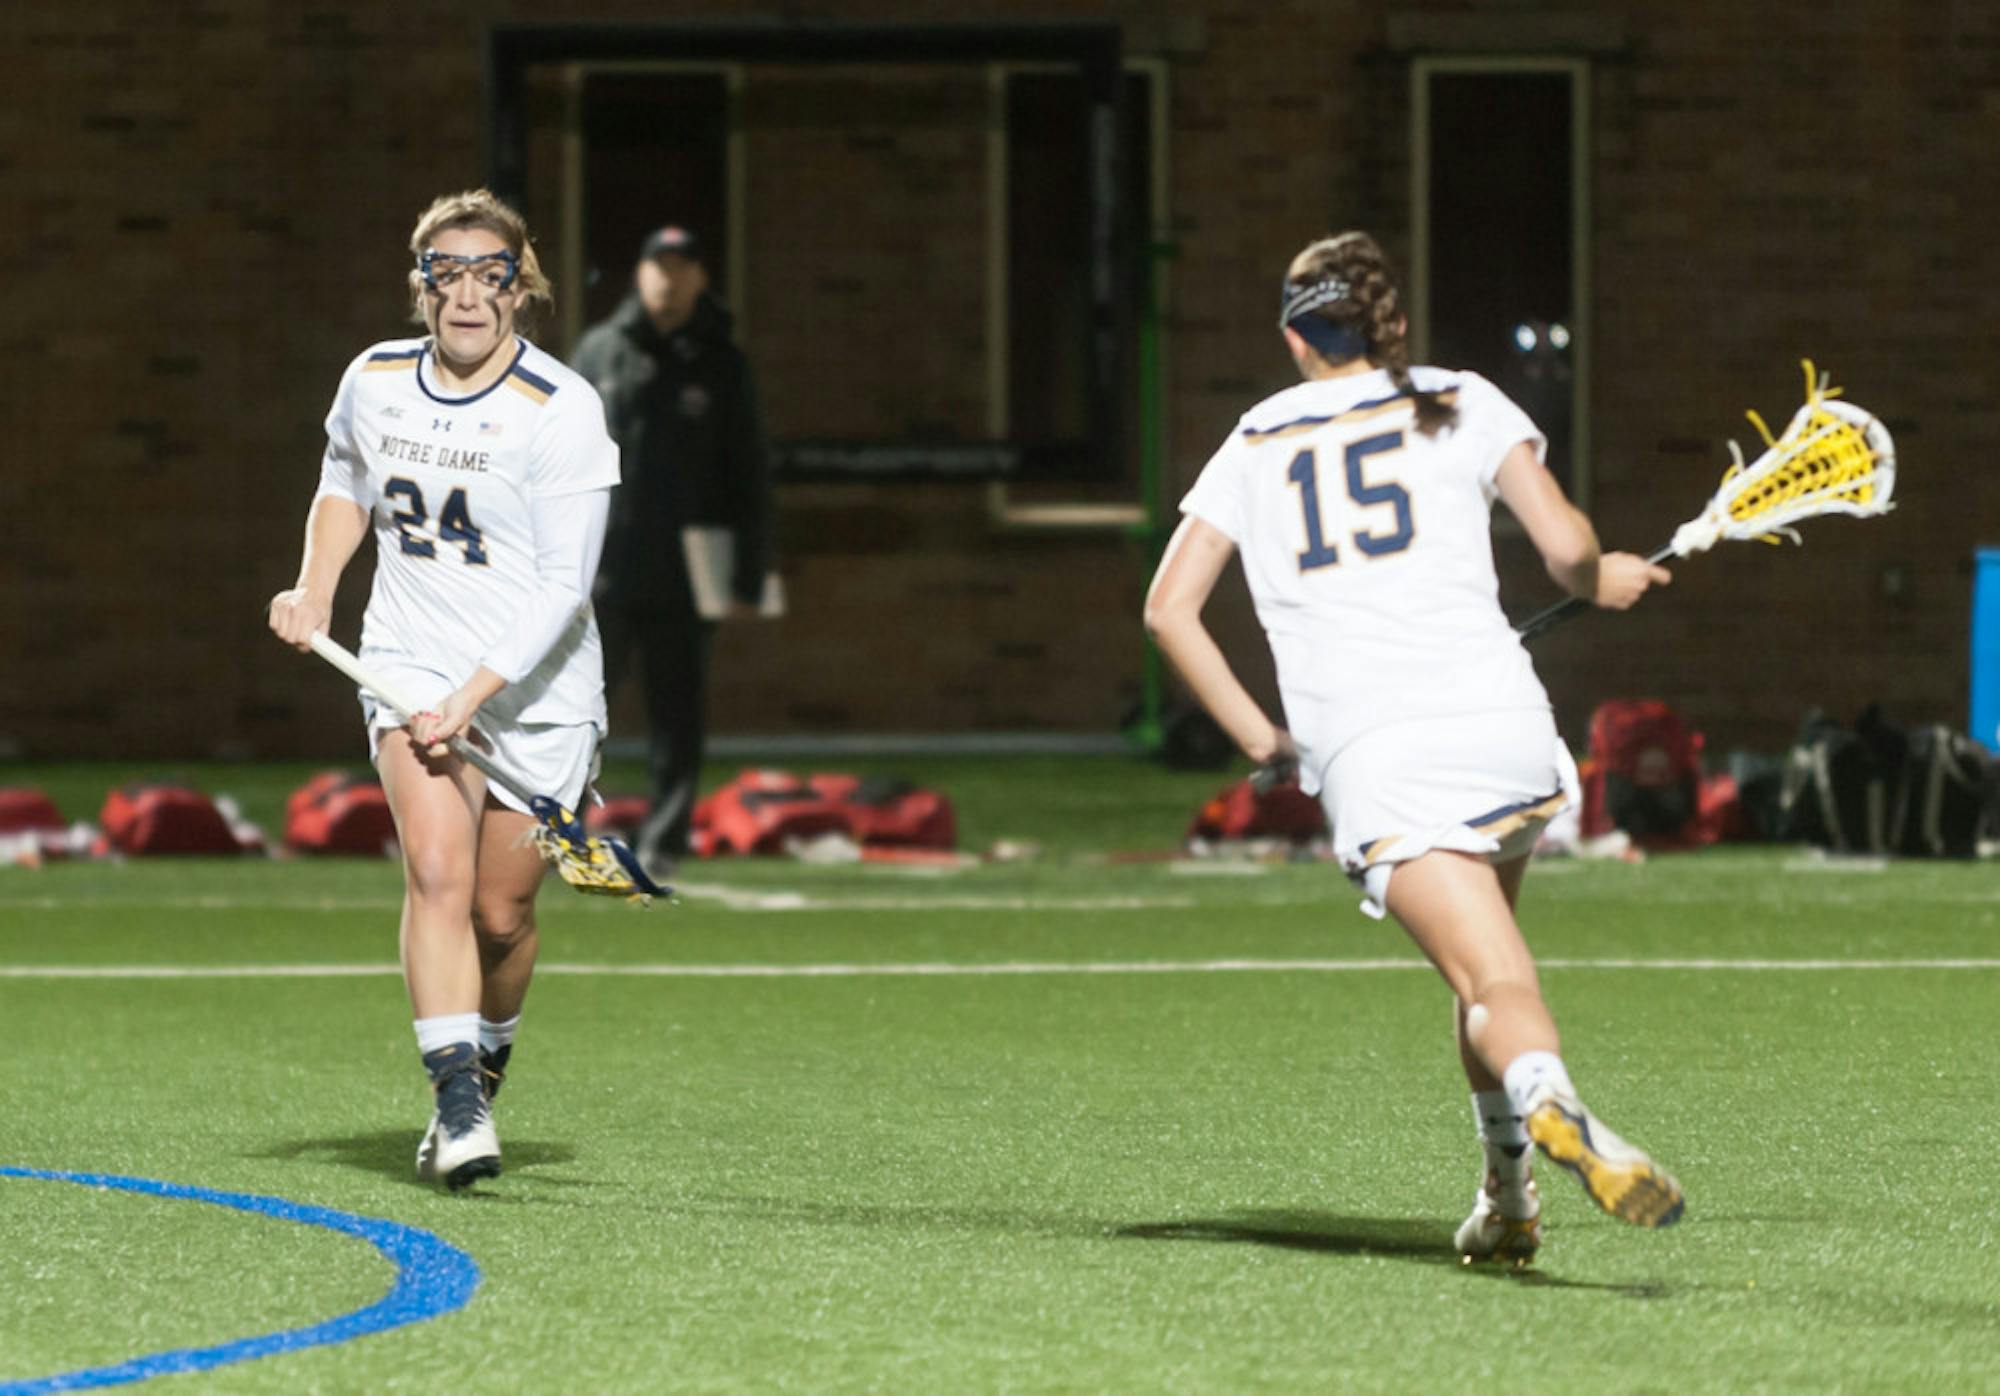 Notre Dame senior midfielder Casey Pearsall makes a cut during a 16-13 Irish win over Ohio State on March 7 at Arlotta Stadium.